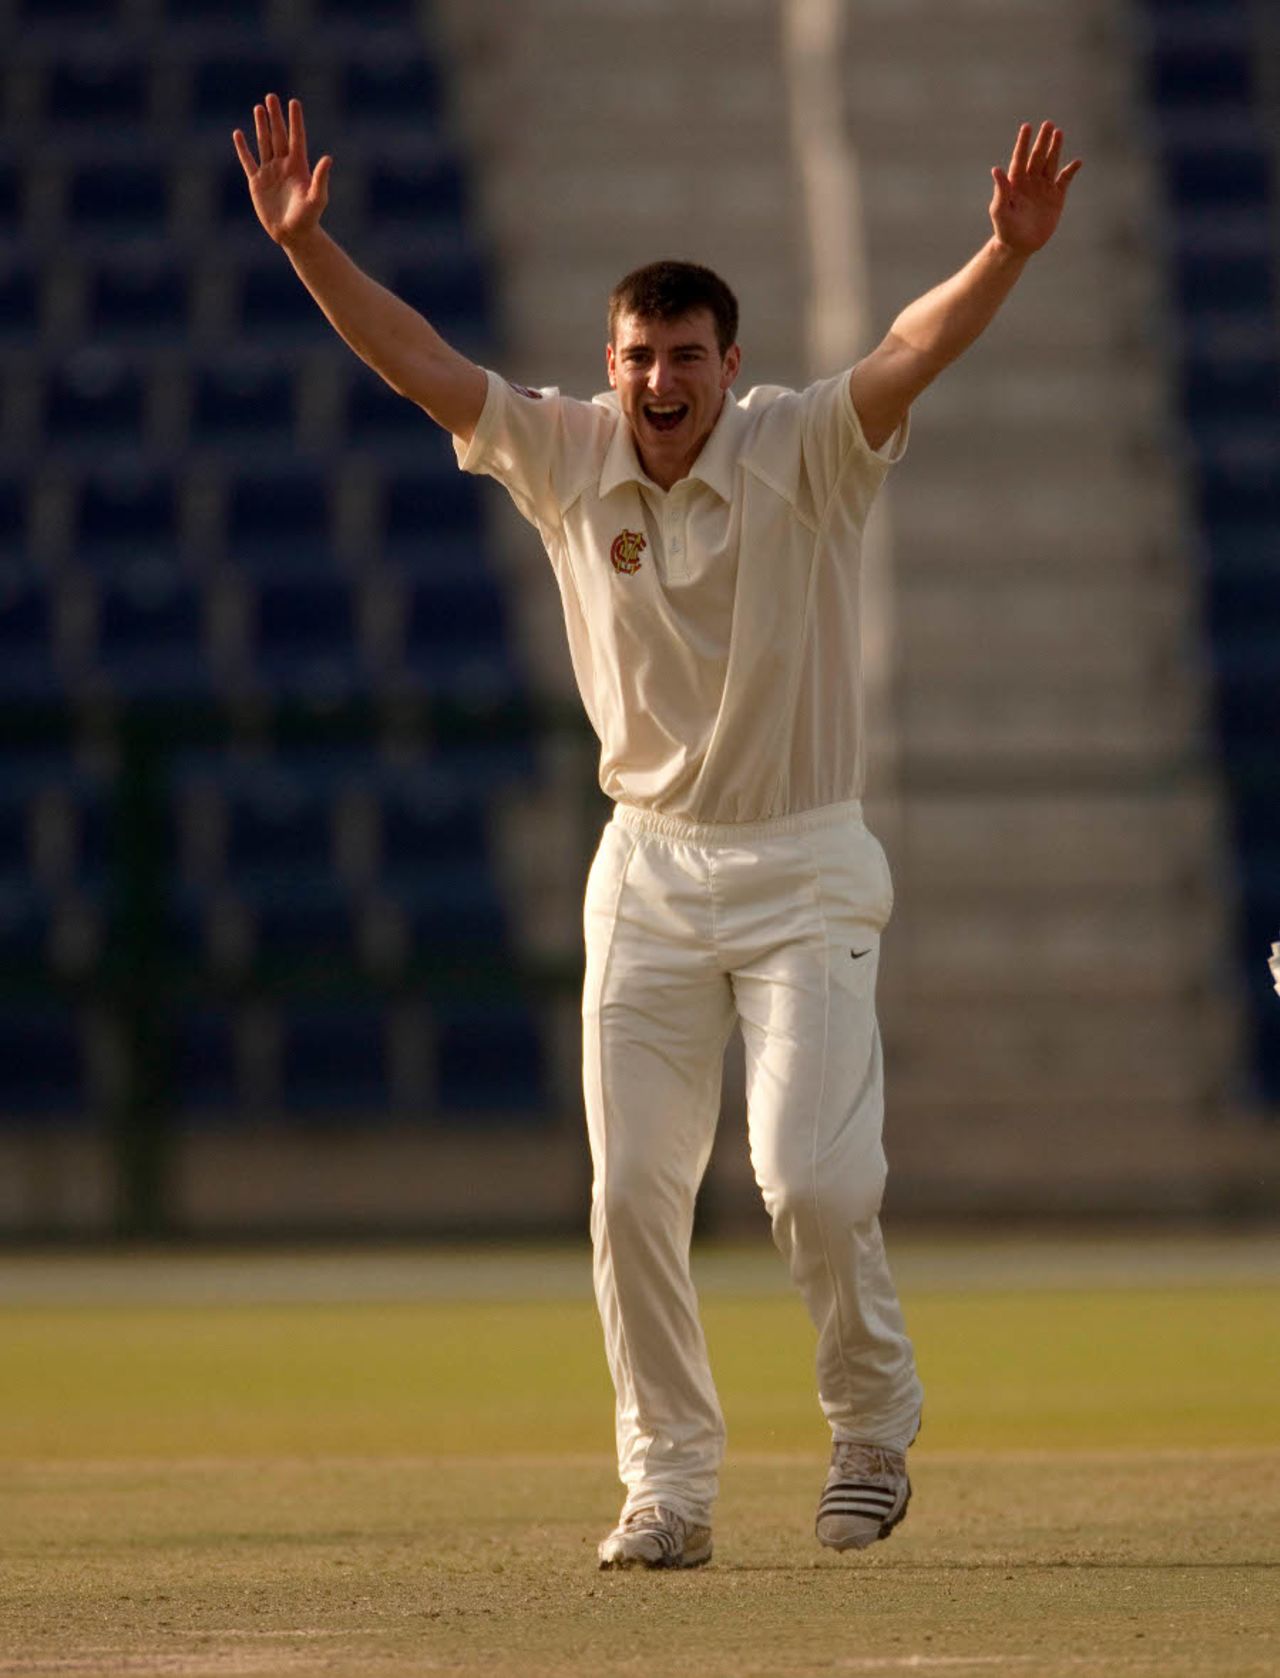 Toby Roland-Jones struck with the new ball, MCC v Nottinghamshire, 3rd day, Abu Dhabi, March 29, 2011